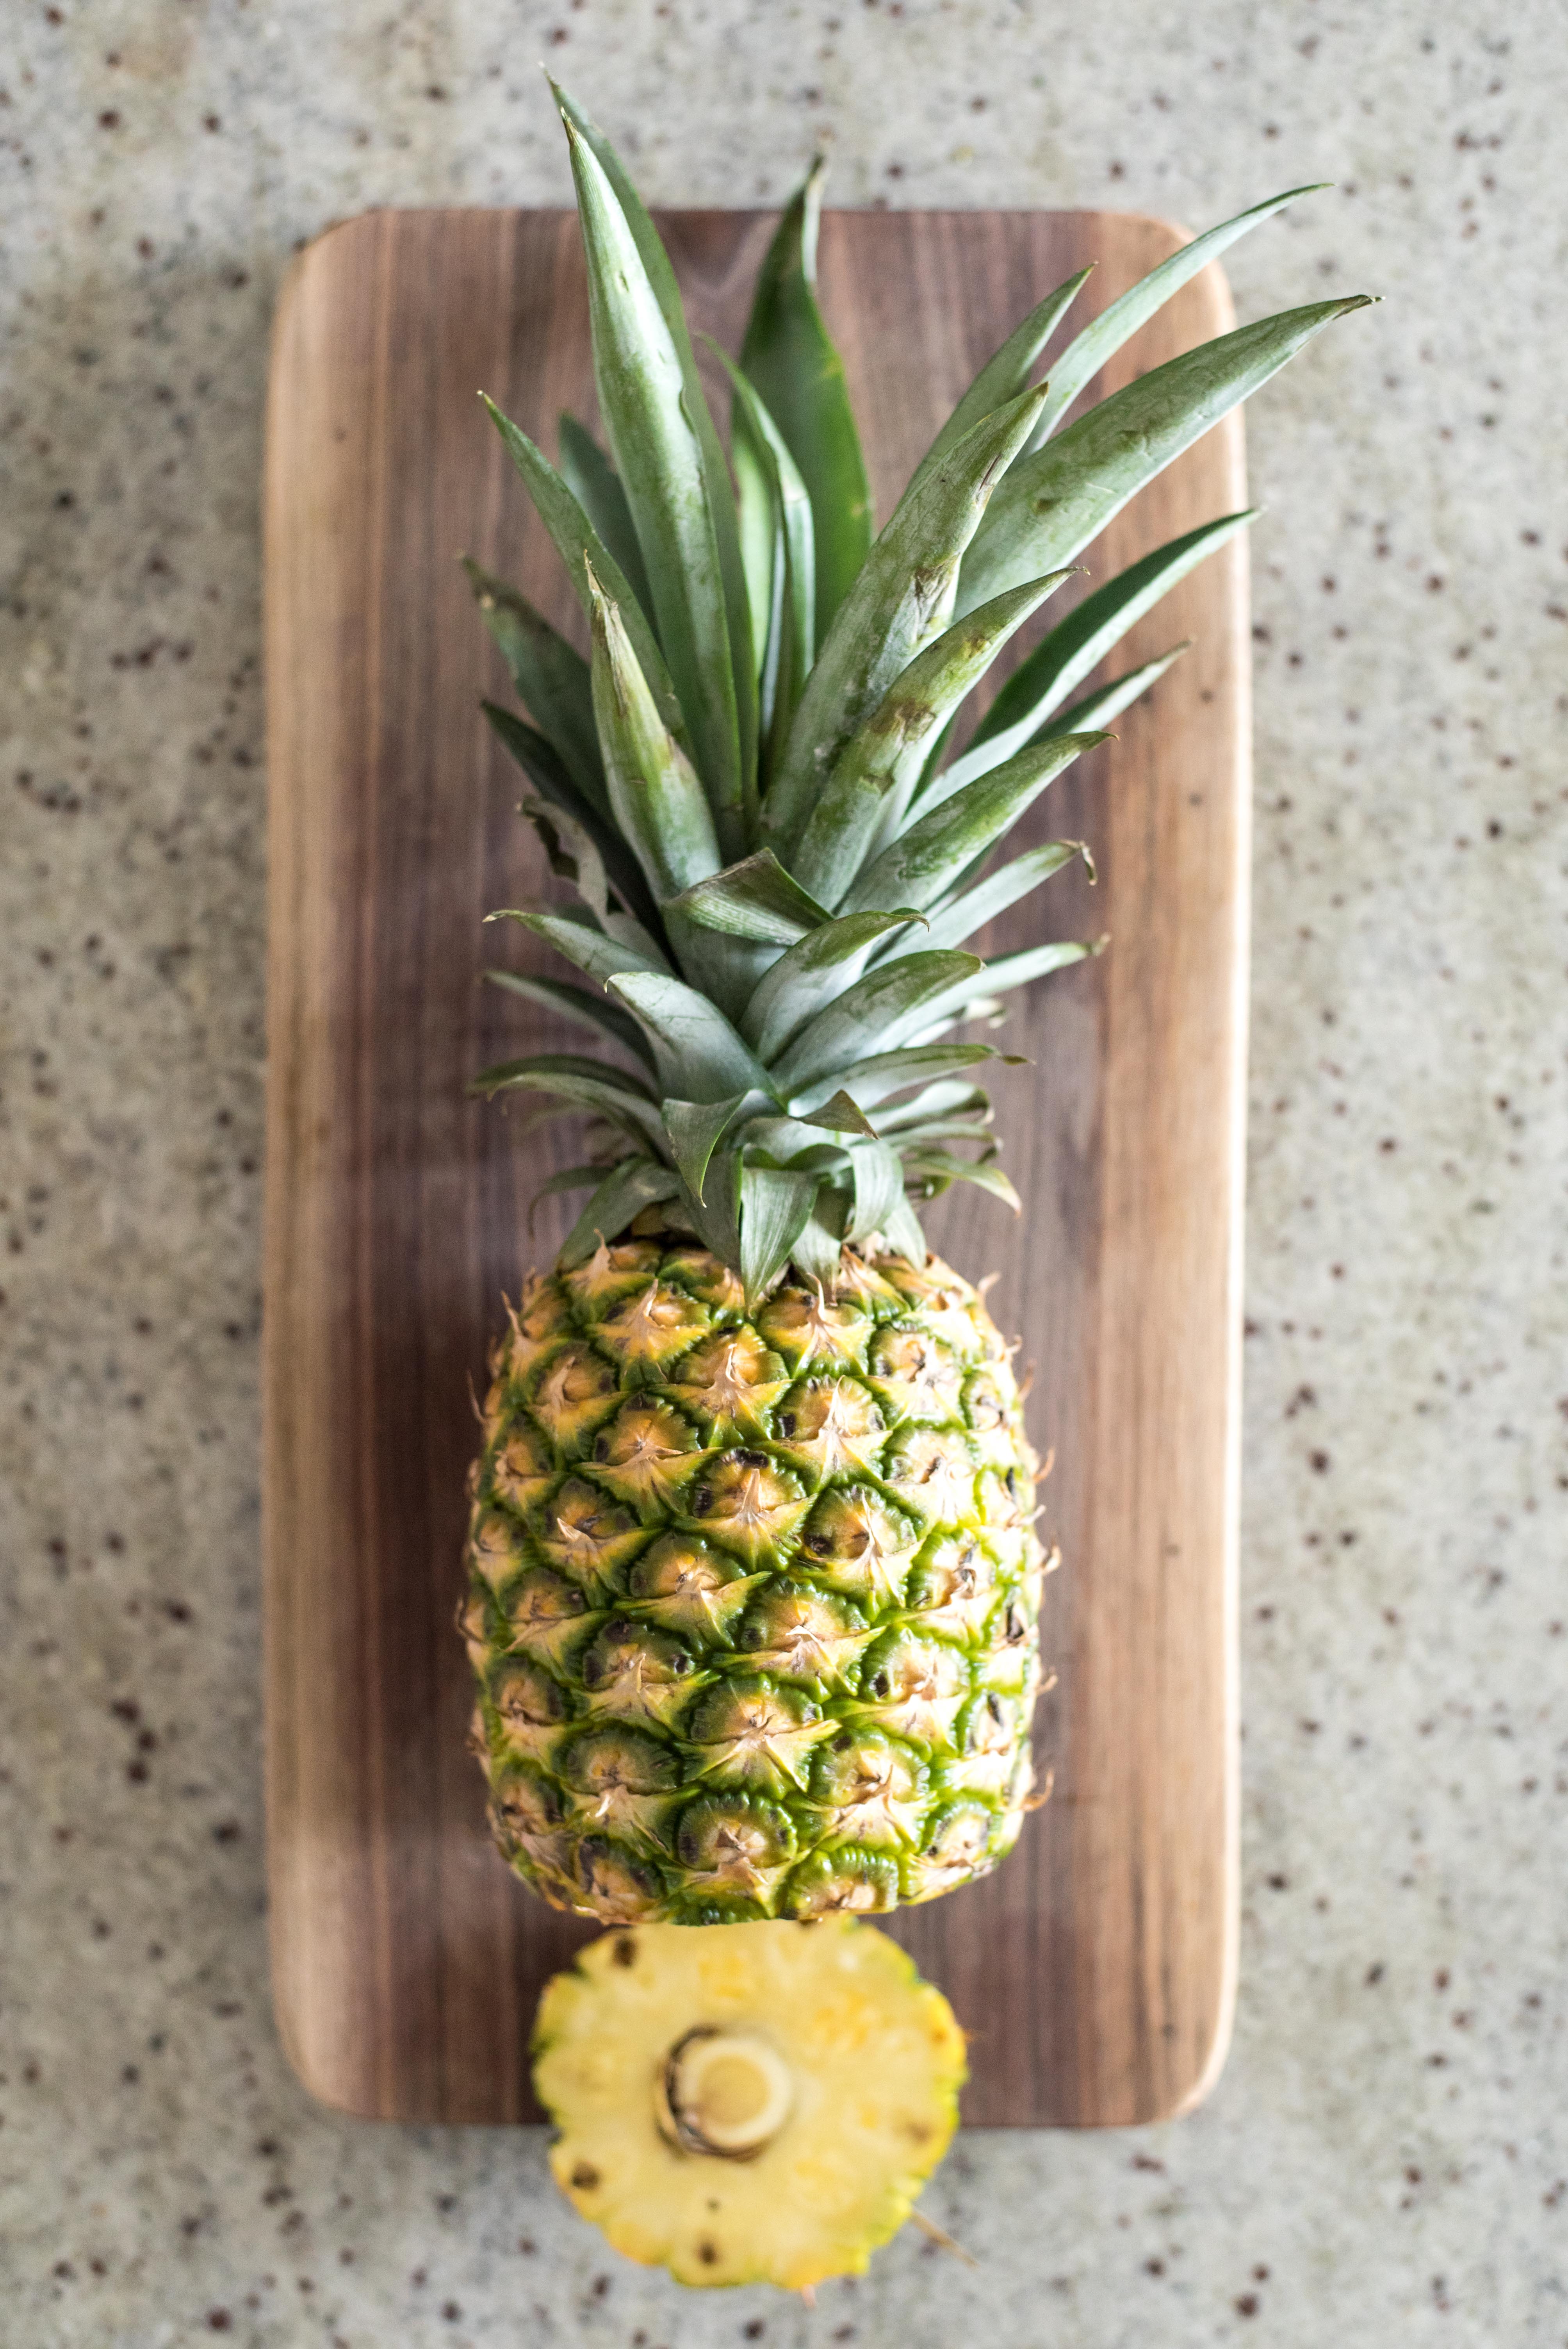 How to Cut a Pineapple | Kenan Hill